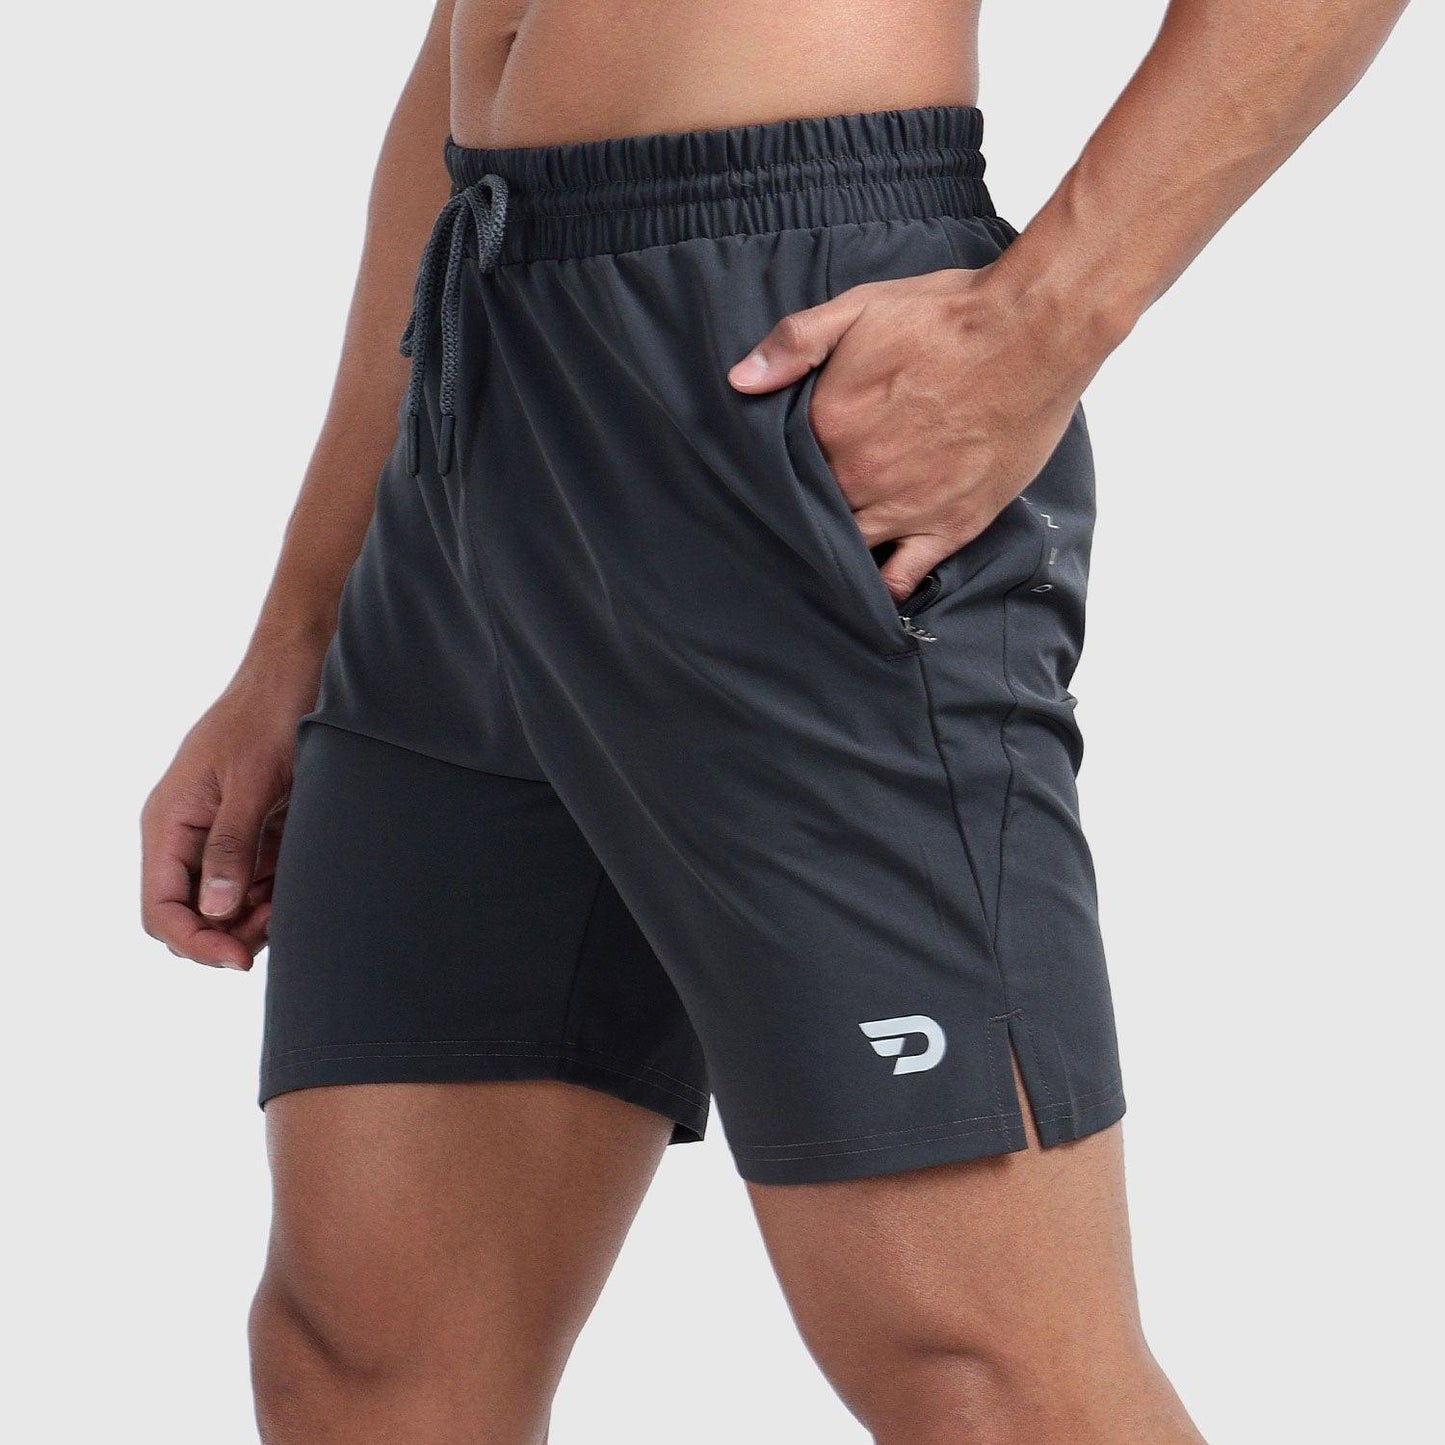 Denmonk's fashionable Coastline Comfort charcoal shorts for men will boost your level of gym fitness.